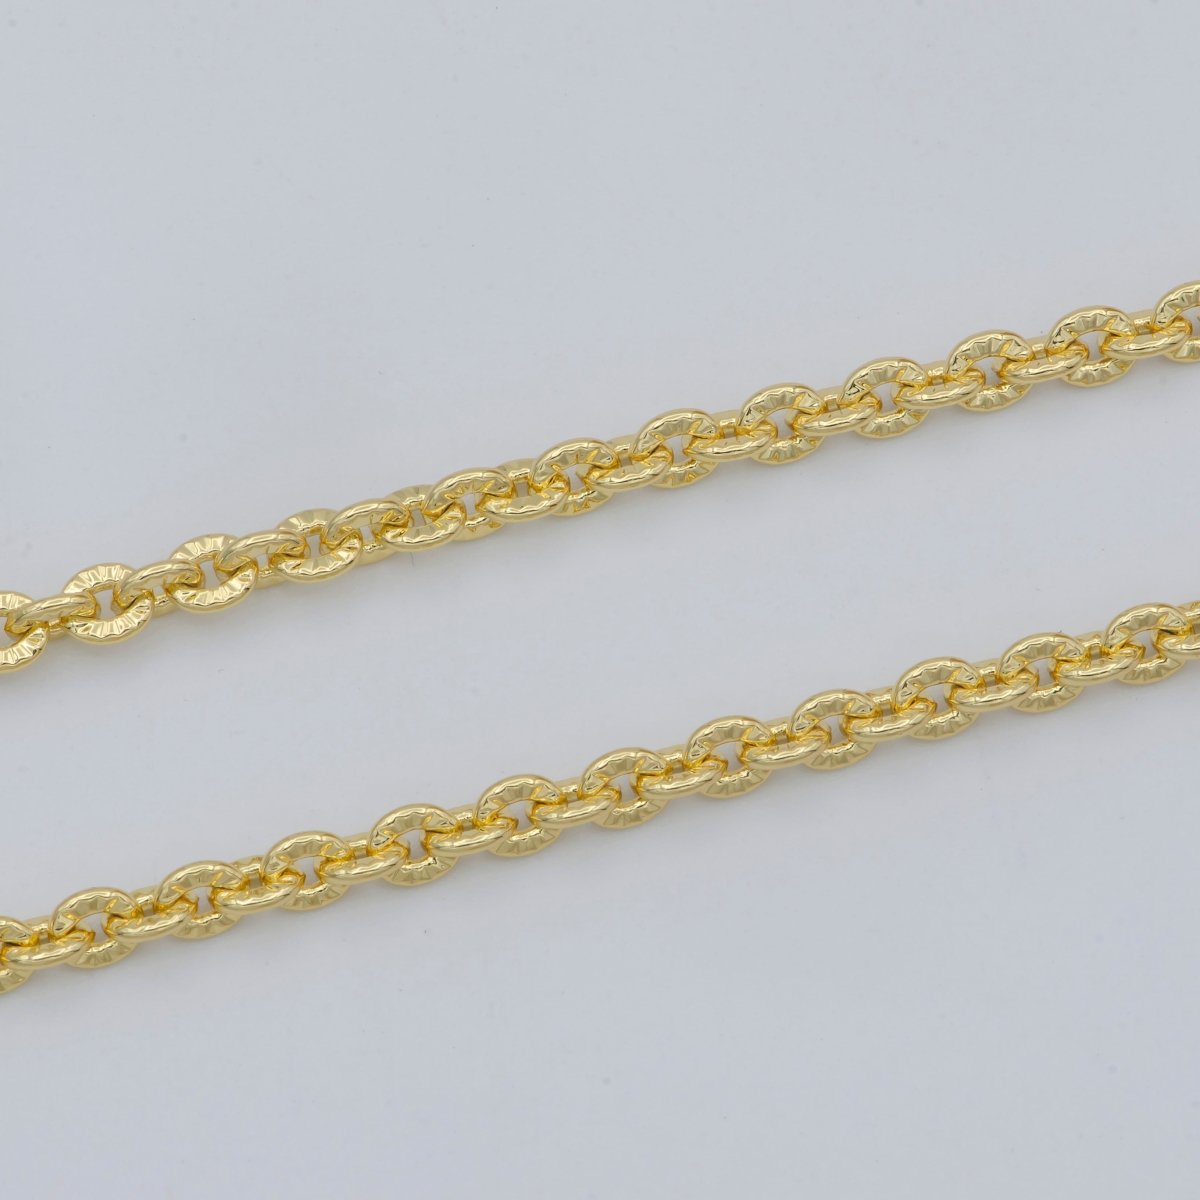 24K Gold Filled Chain, Textured Unique Rolo Chain, 3.7mm, Unfinished Chain by Yard, For Jewelry Making, For Necklace, Bracelet, Anklet Supply | ROLL-469 Clearance Pricing - DLUXCA